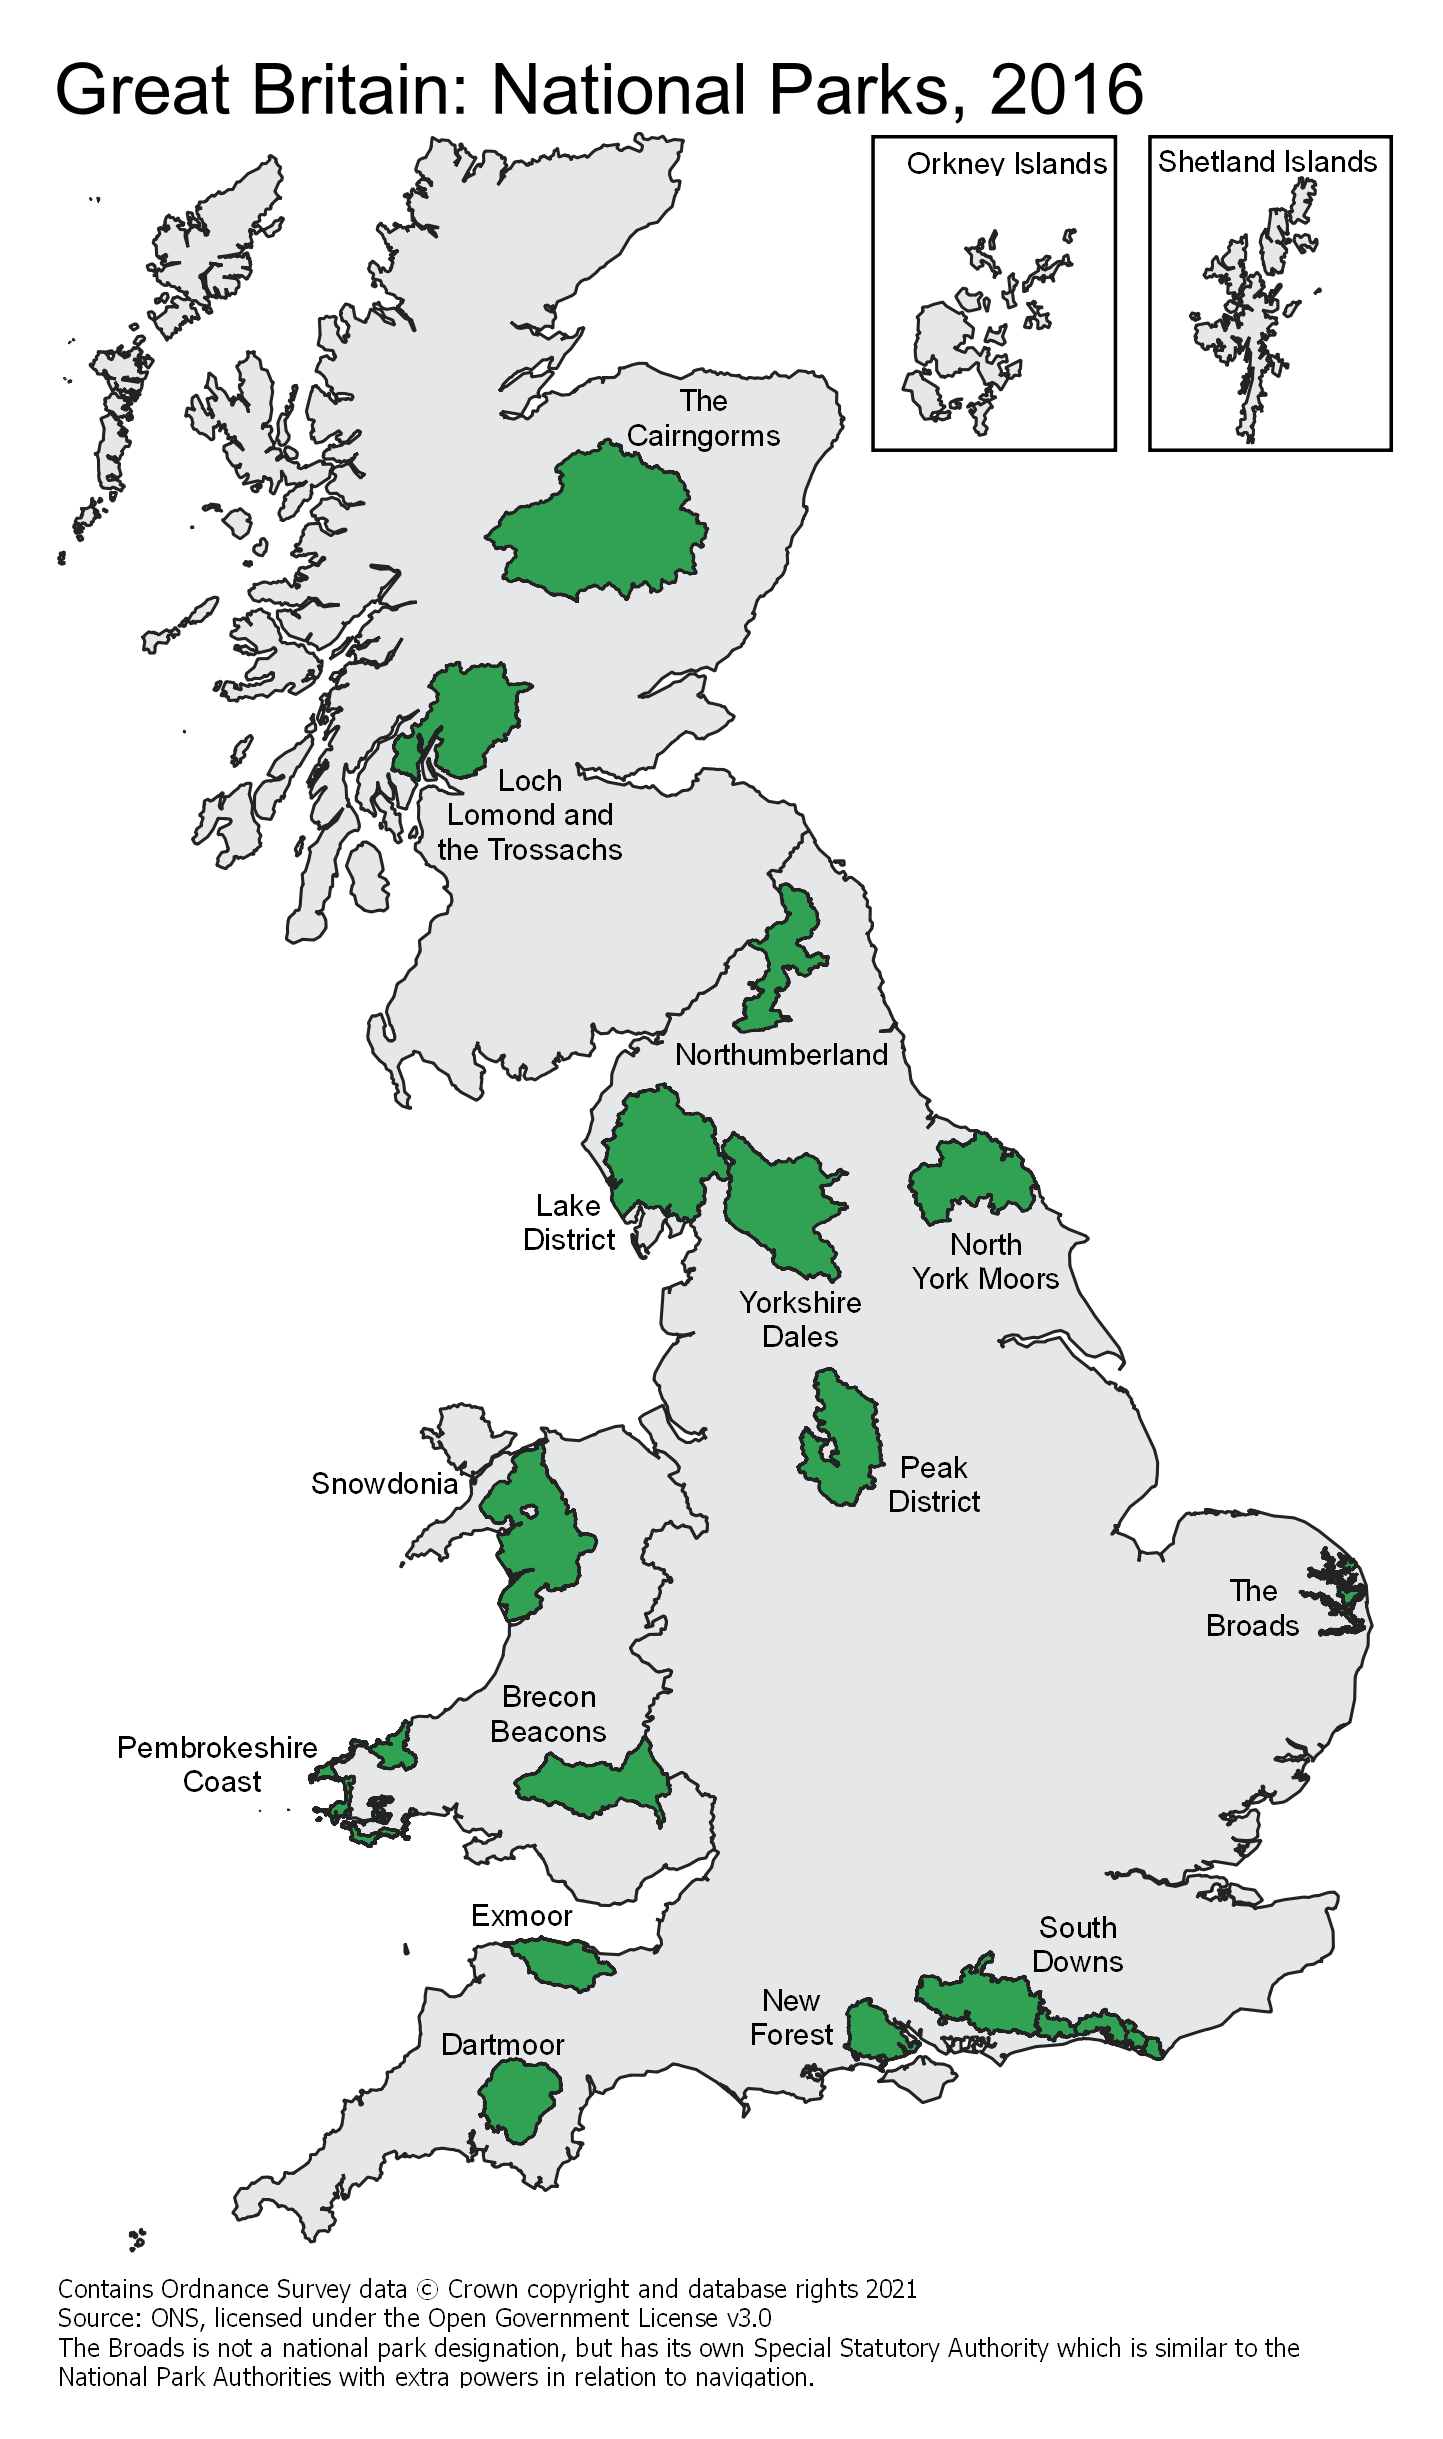 A general reference map of National Parks in Great Britain